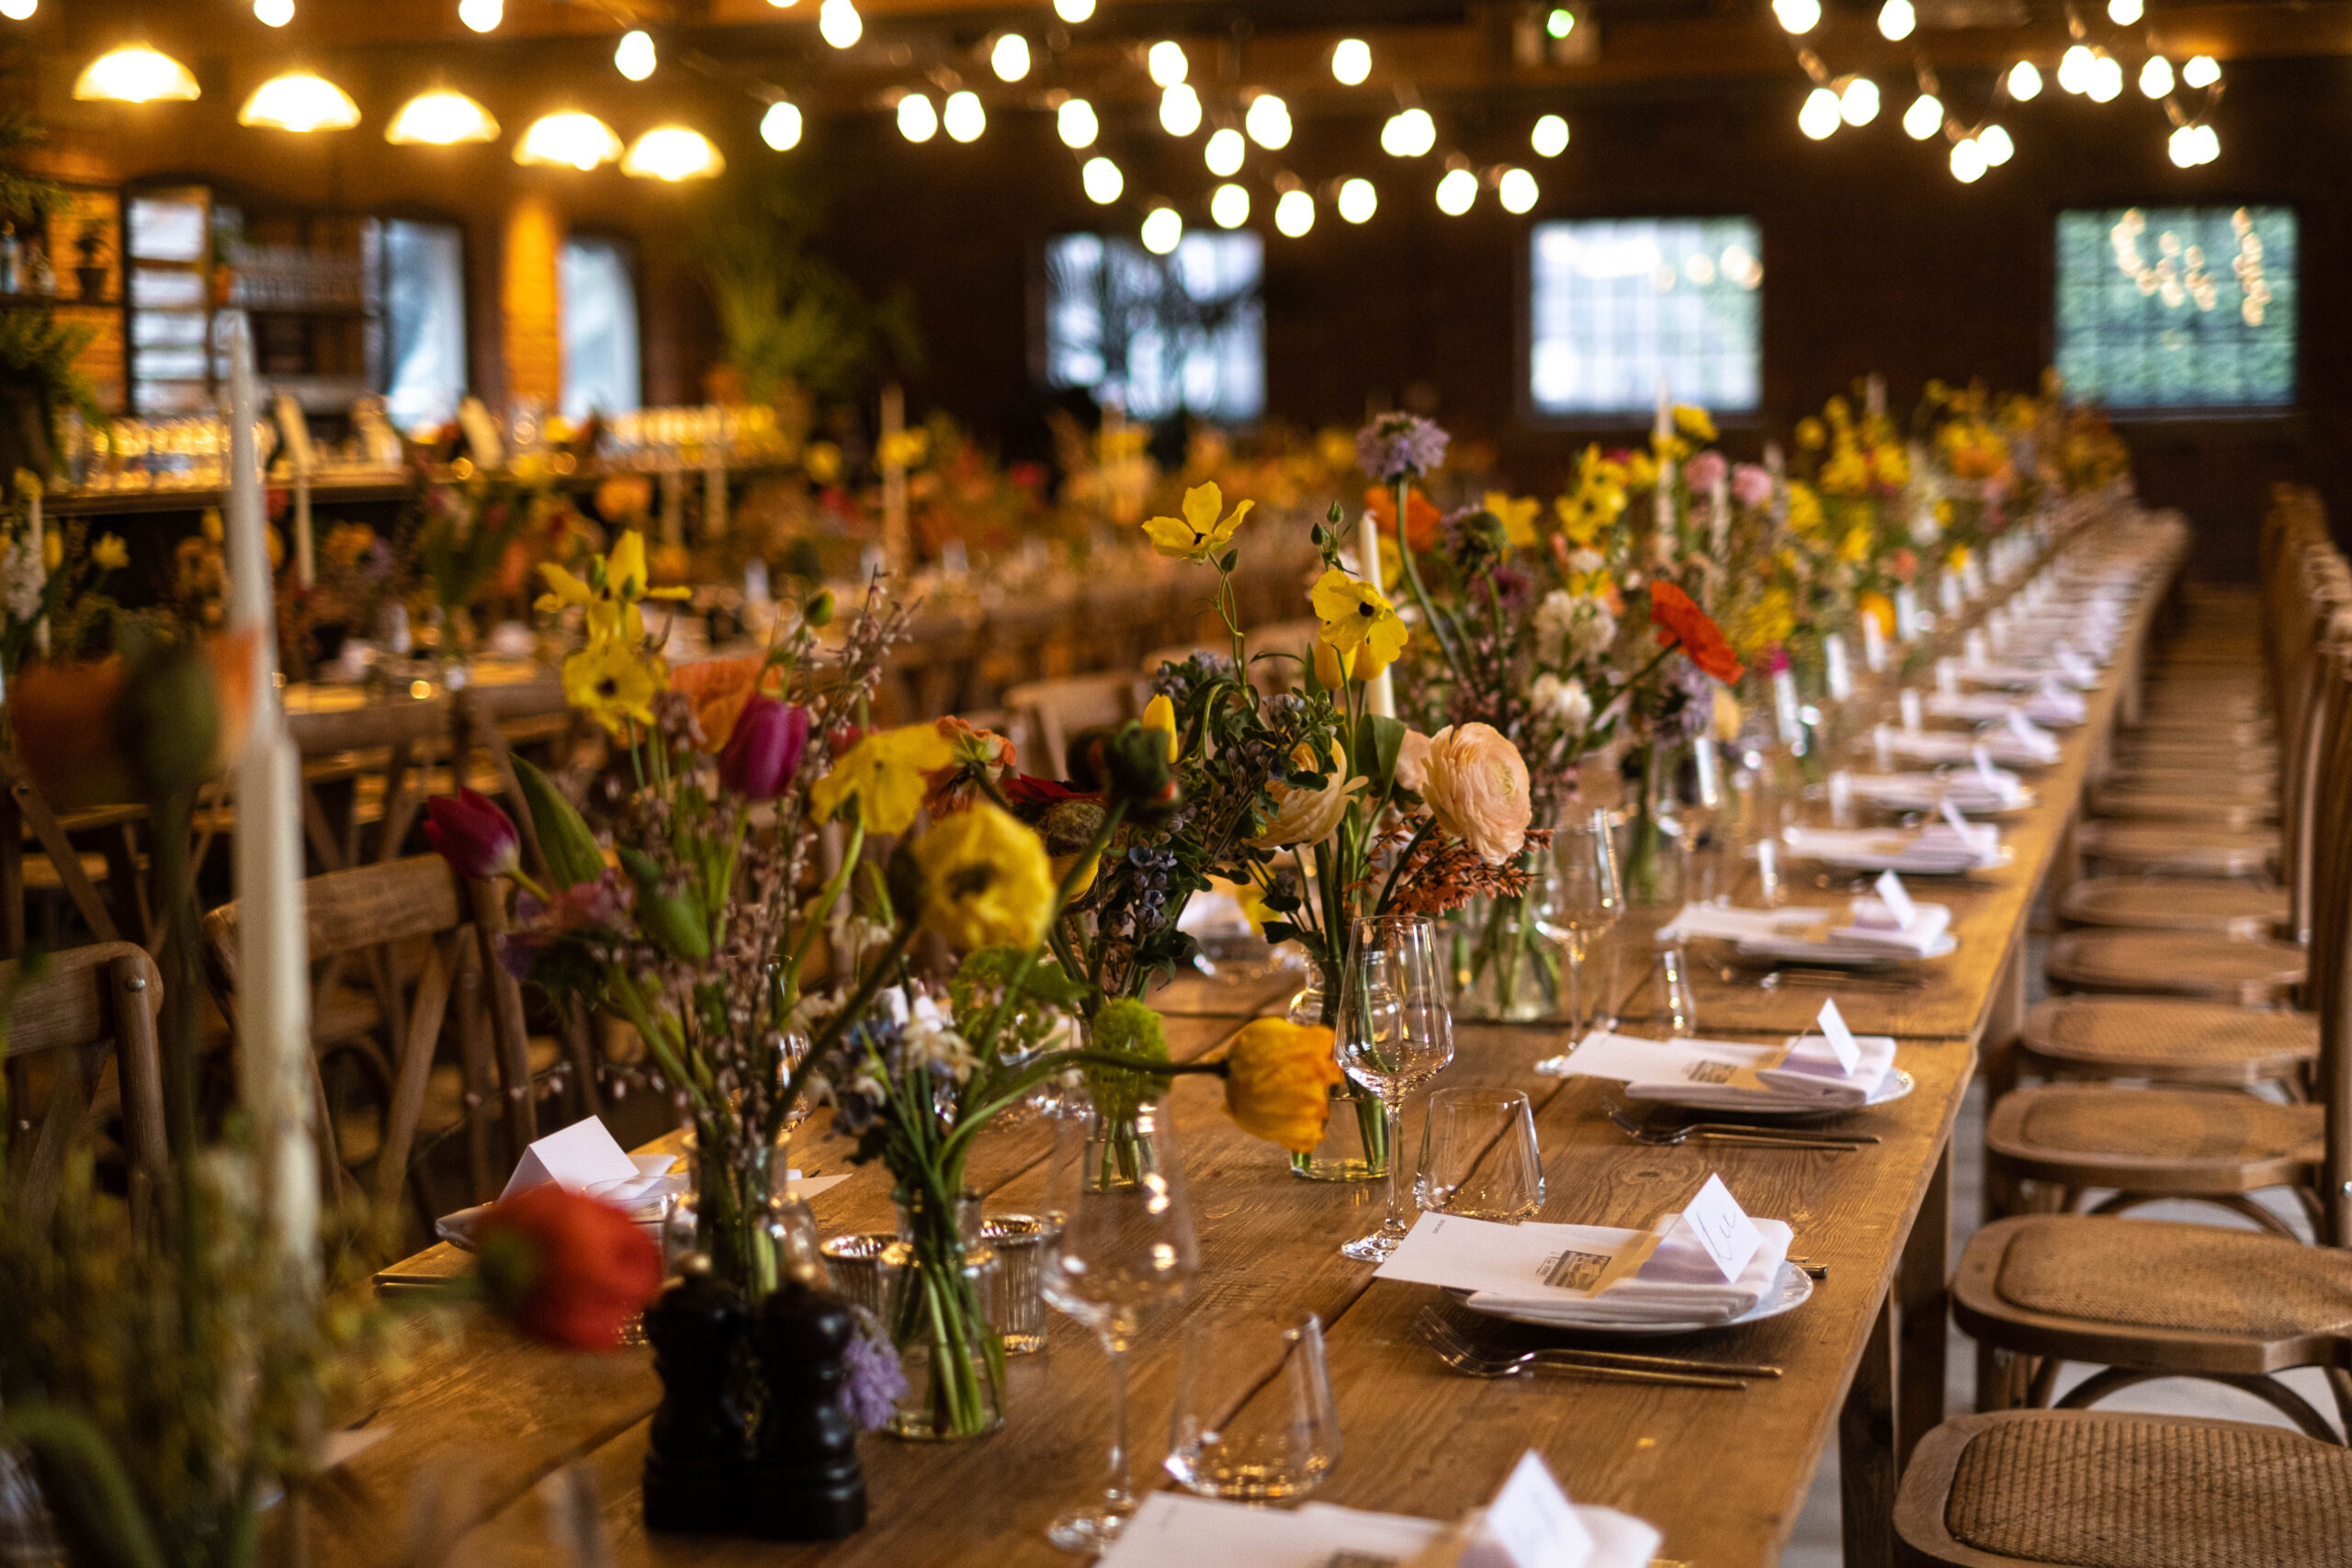 A long decorated table with flowers and place settings